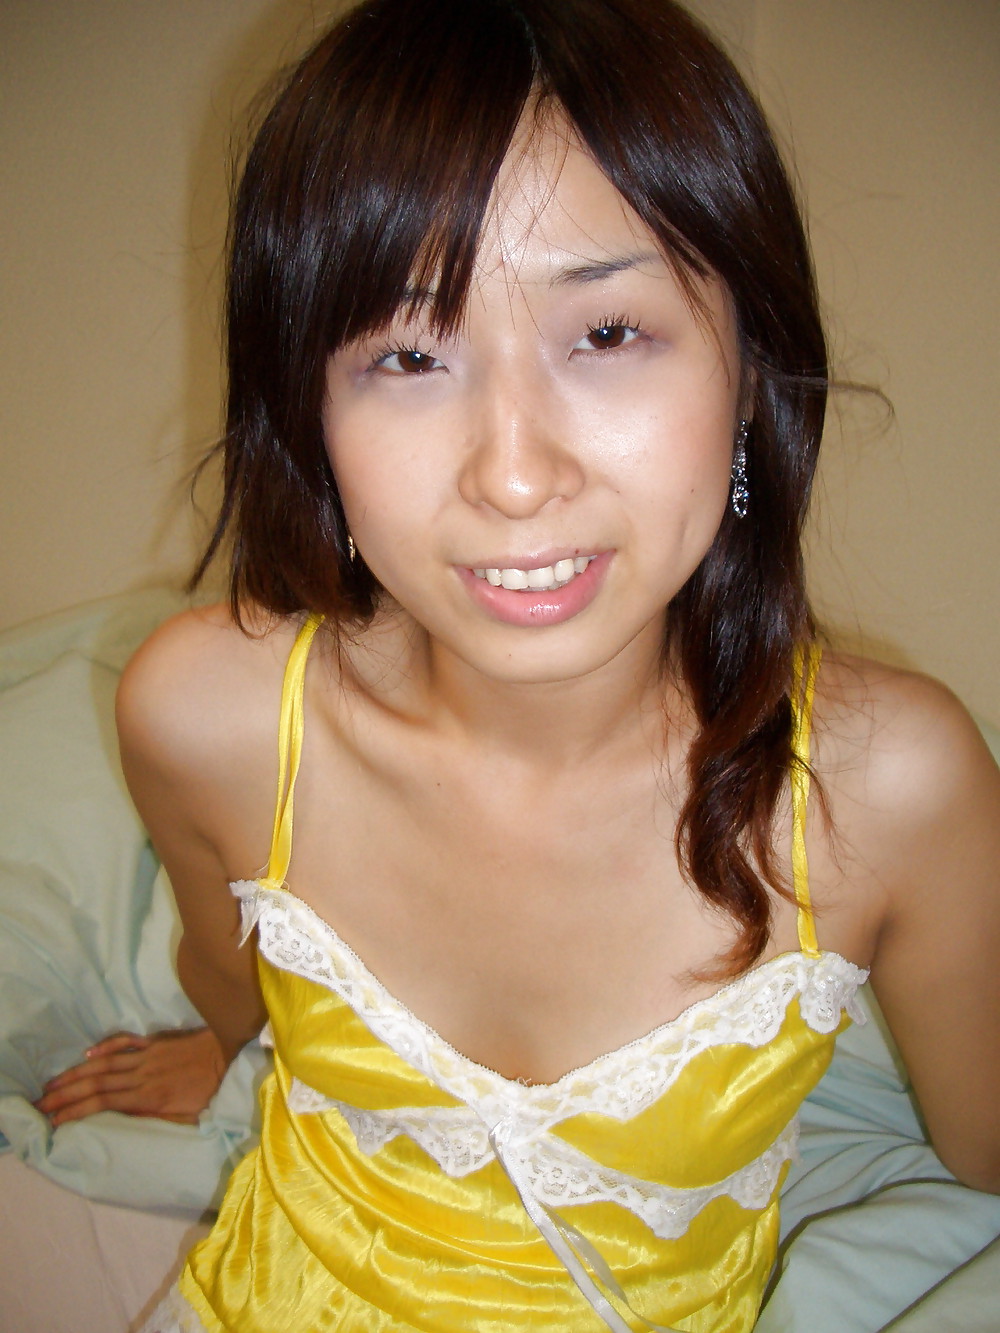 Japanese Teen spread and creampie (Part 1) #19312908